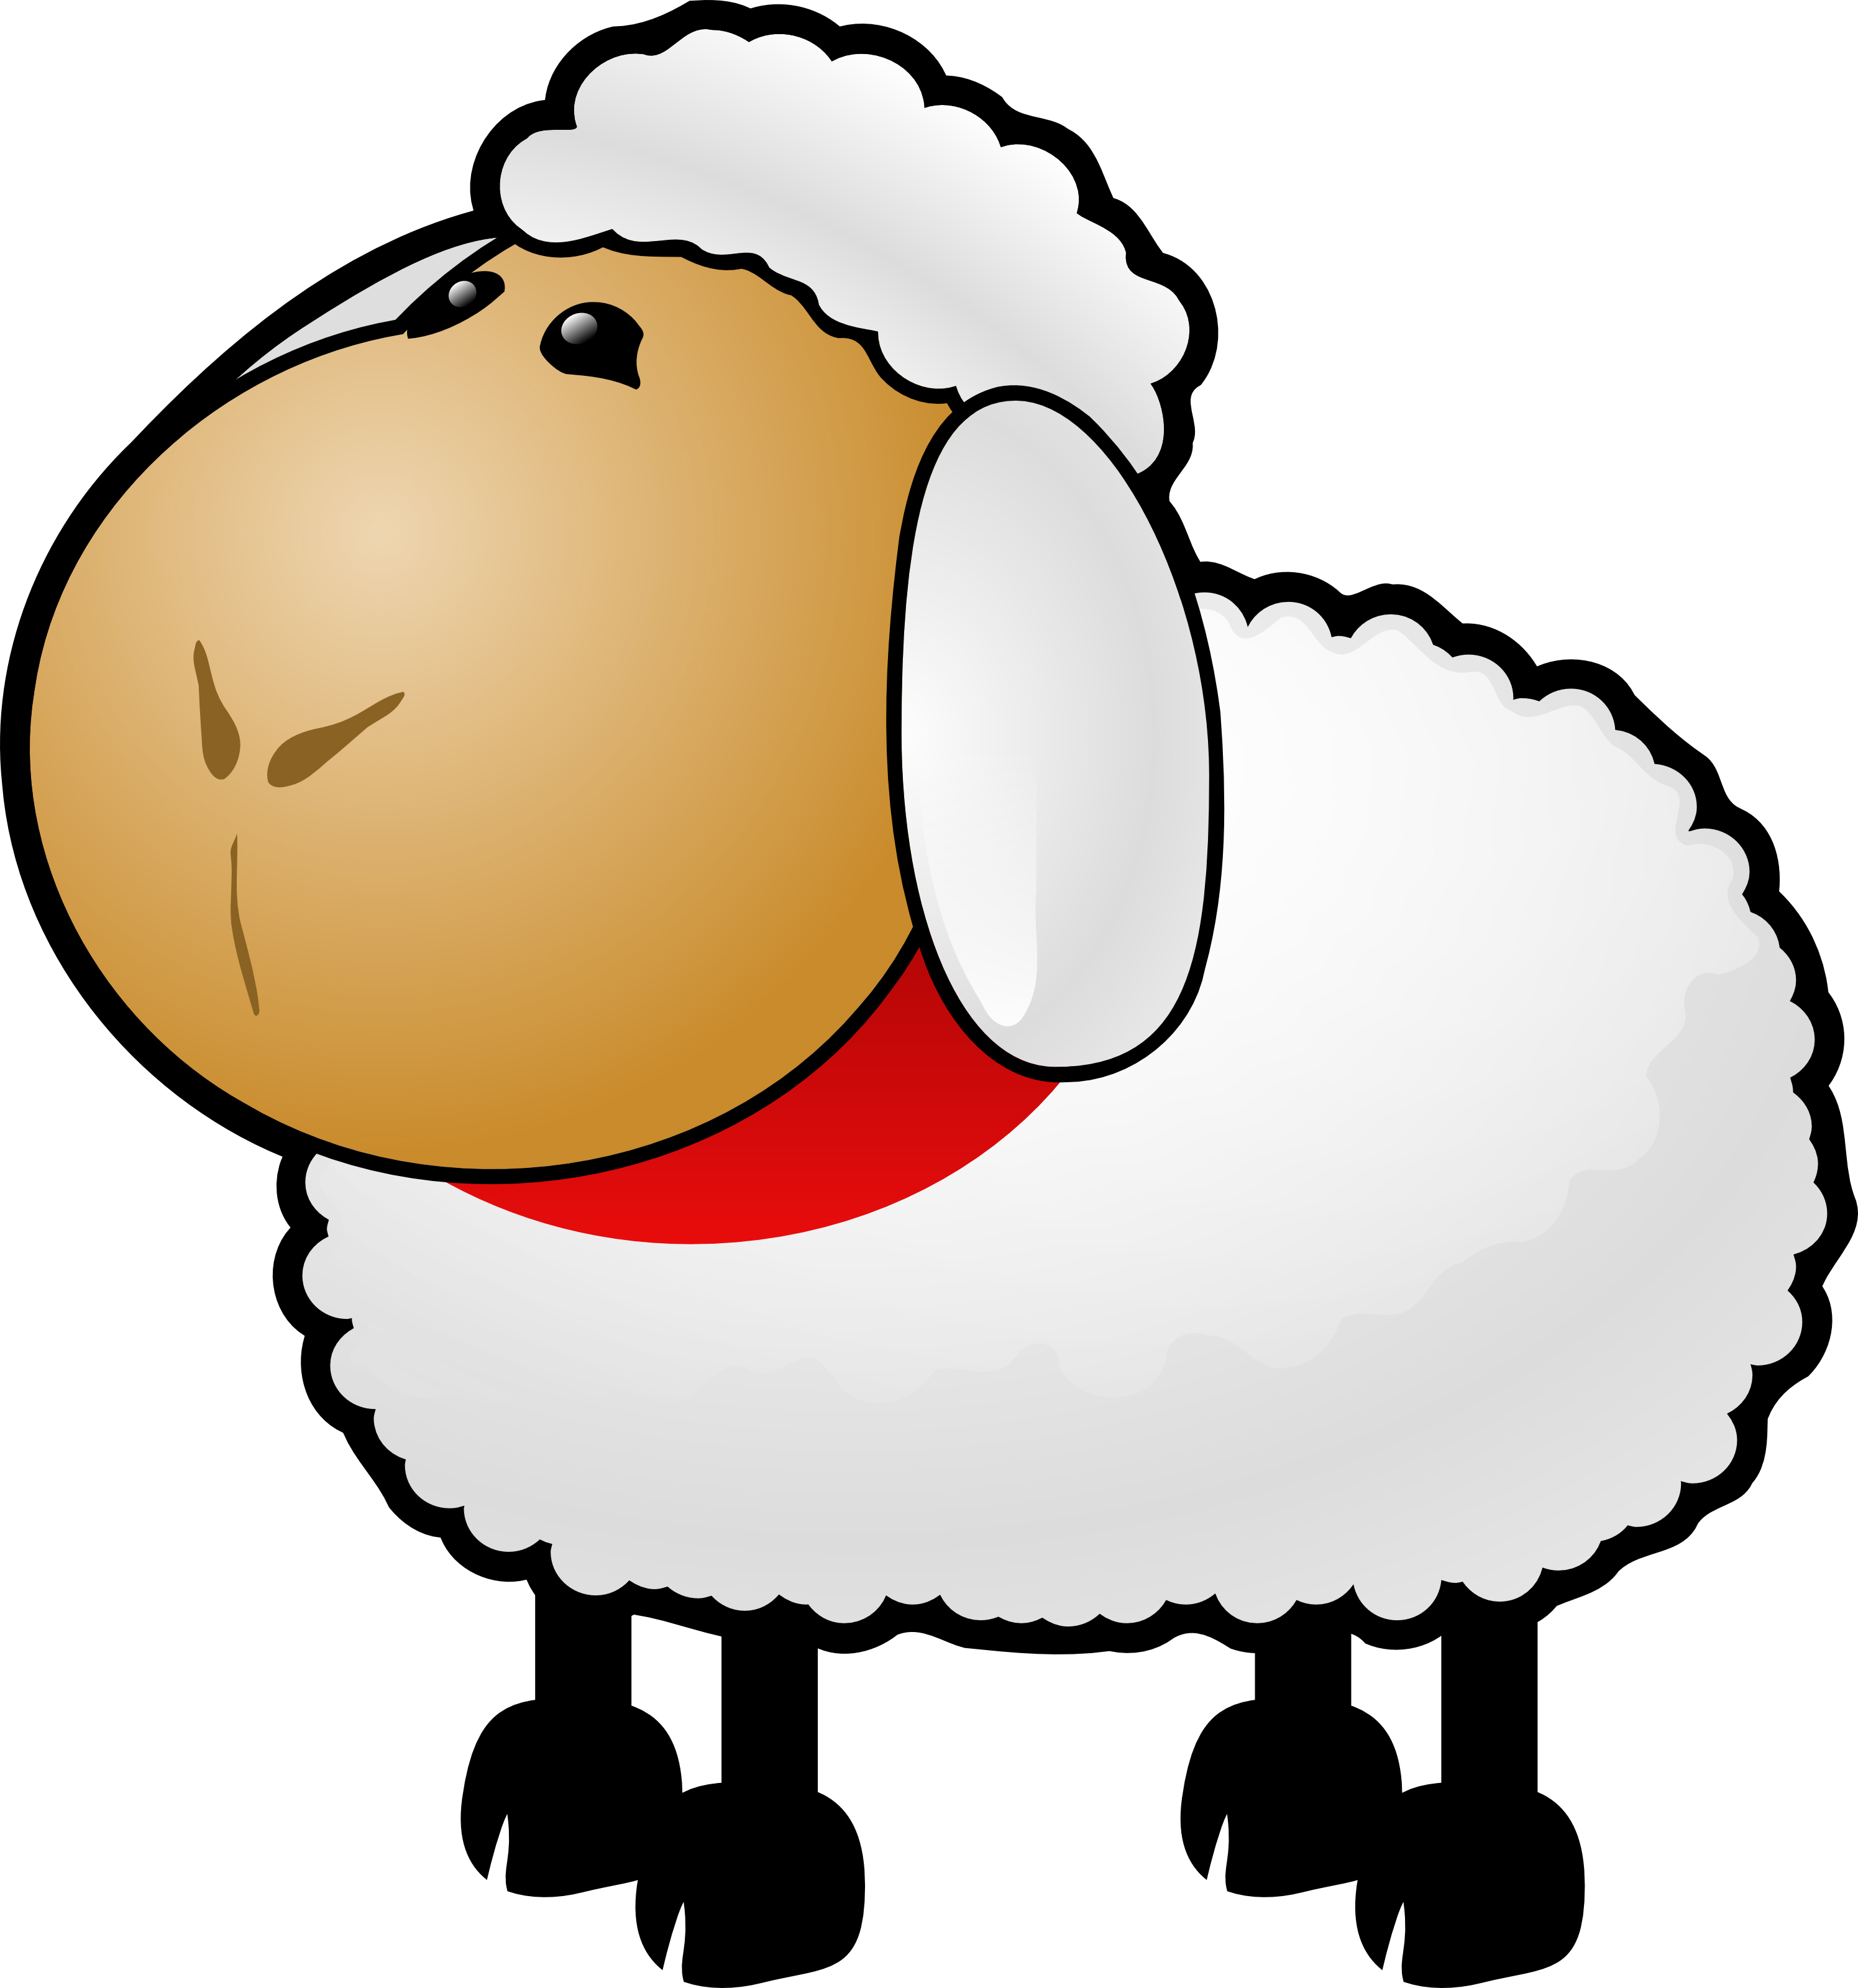 Sheep  black and white sheep lamb clipart black and white free images 3